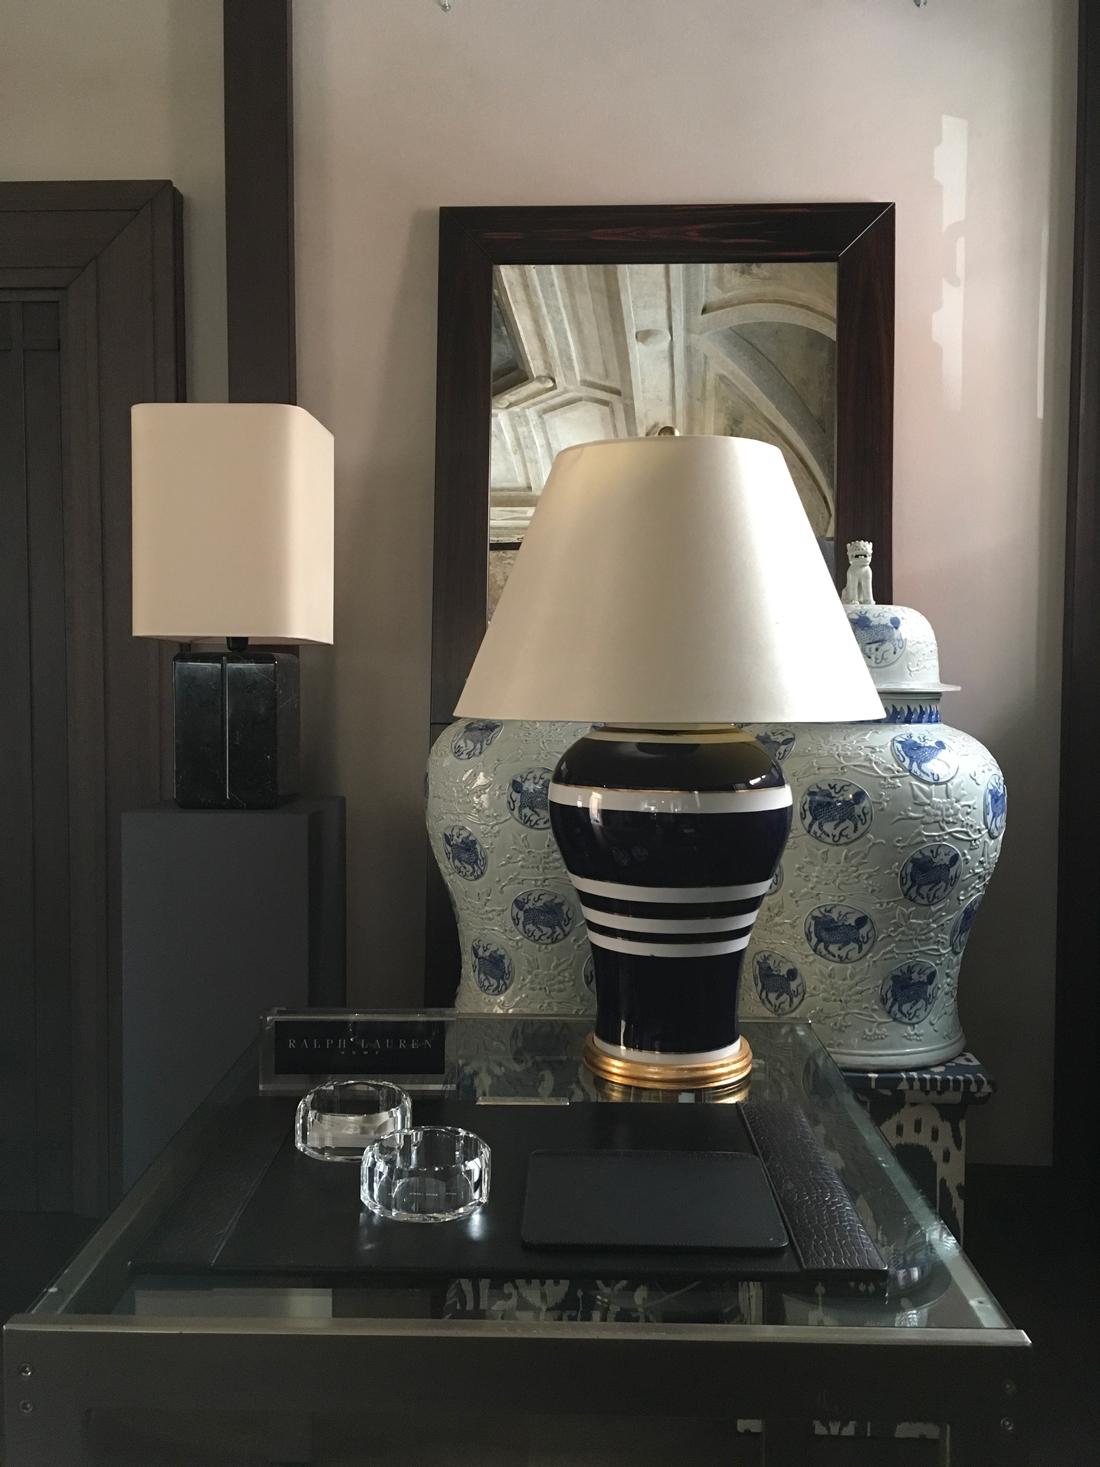 This is a Classic ginger jar silhouette with striped glazed smooth porcelain lamp that is topped with a white silk Empire shade to tie the look together.
Hand painted horizontal stripes. Ralph Lauren label.
Timeless Ralph Lauren table lamp.
EU